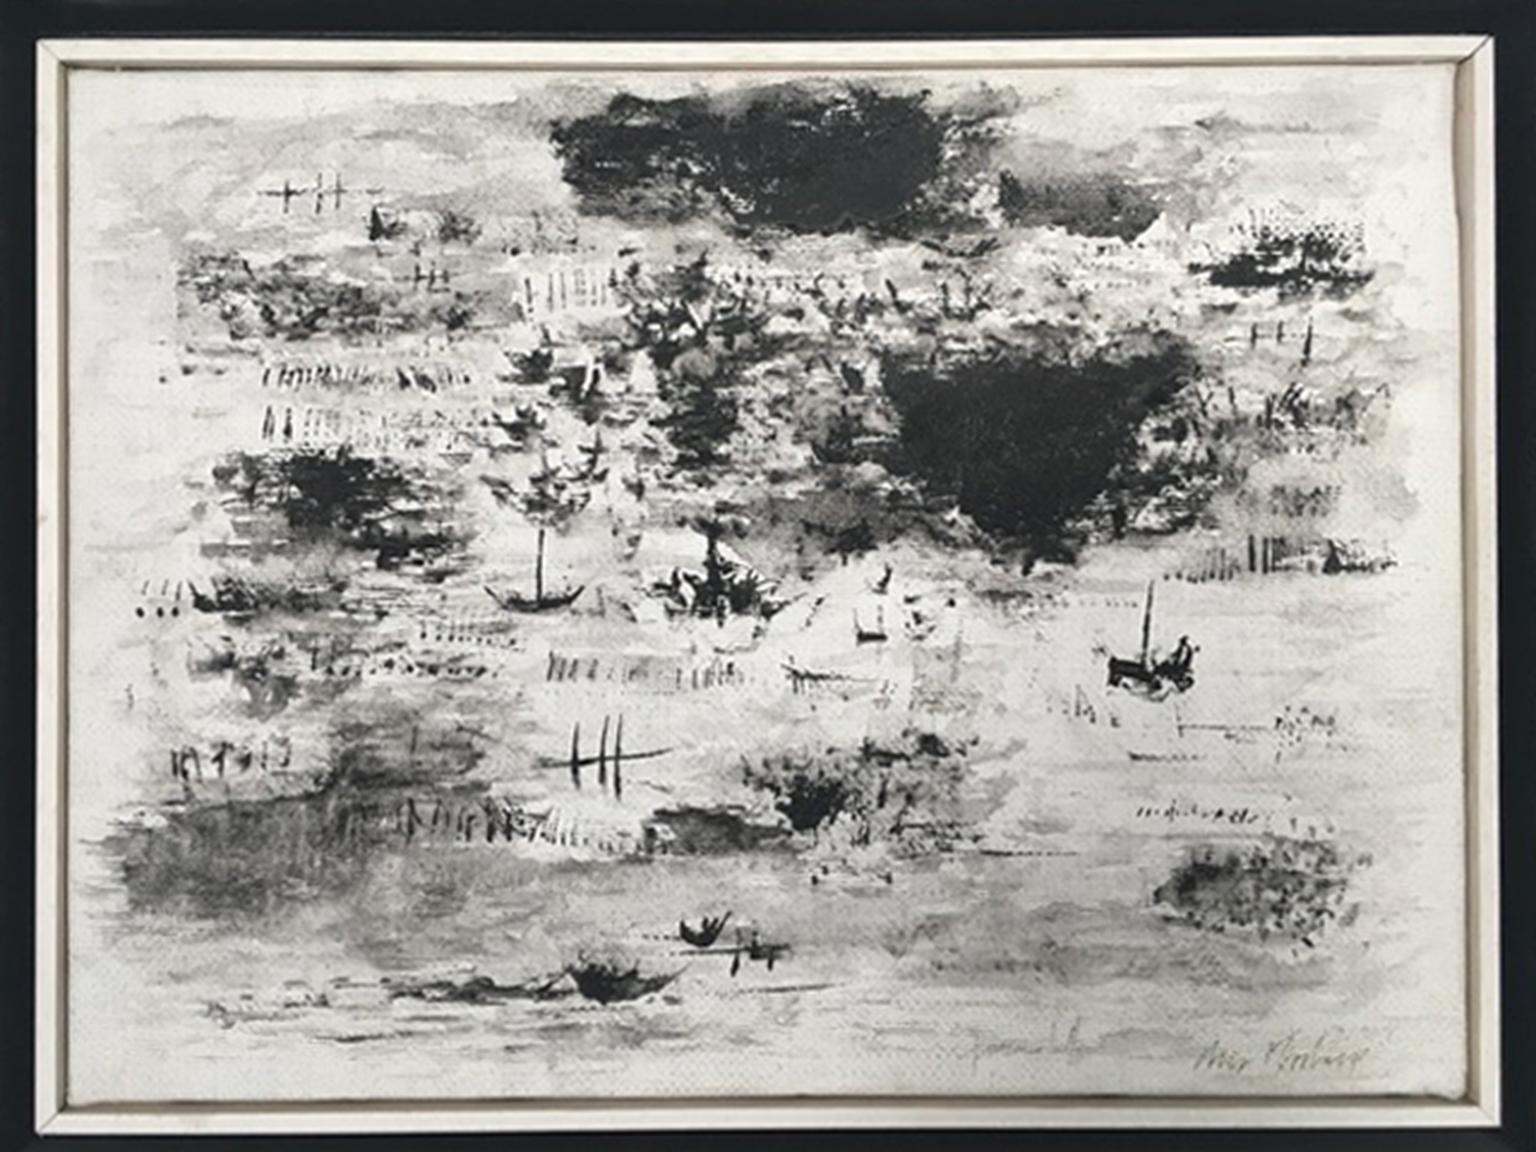 This abstract painting in black and white, seems to take a photo of the flemish landscape during a snowing winter day. We can feel the sense of slow rithms of life, a sense of tranquillity, borning from the vision of the delicate figures of the